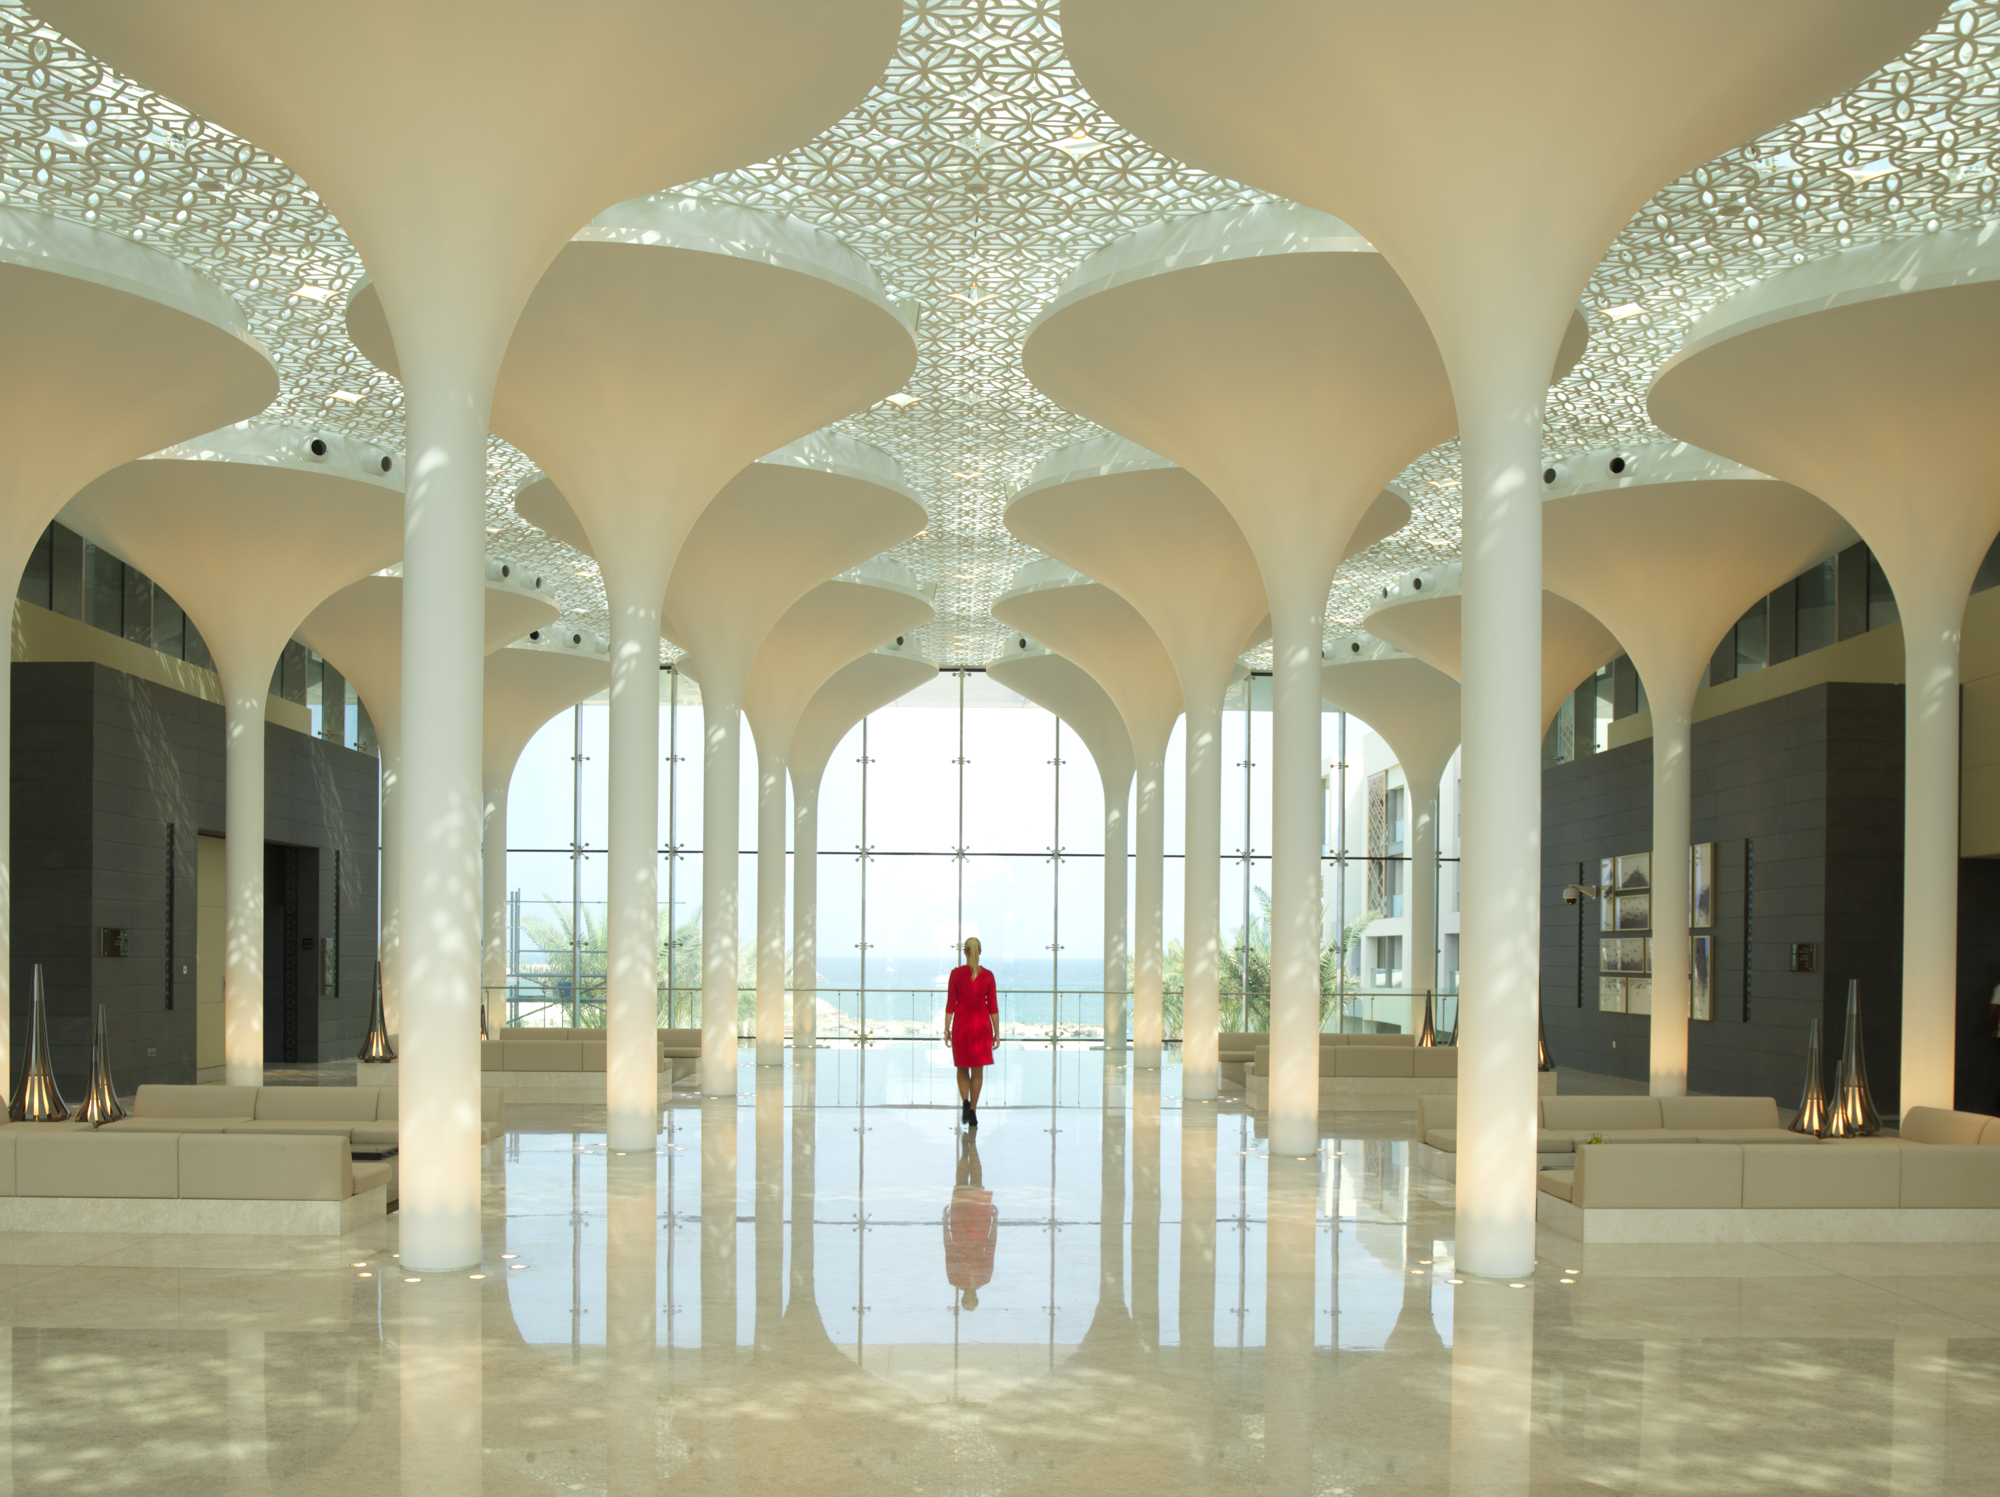 a woman in a red dress in a large room with white columns with Sheikh Zayed Mosque in the background